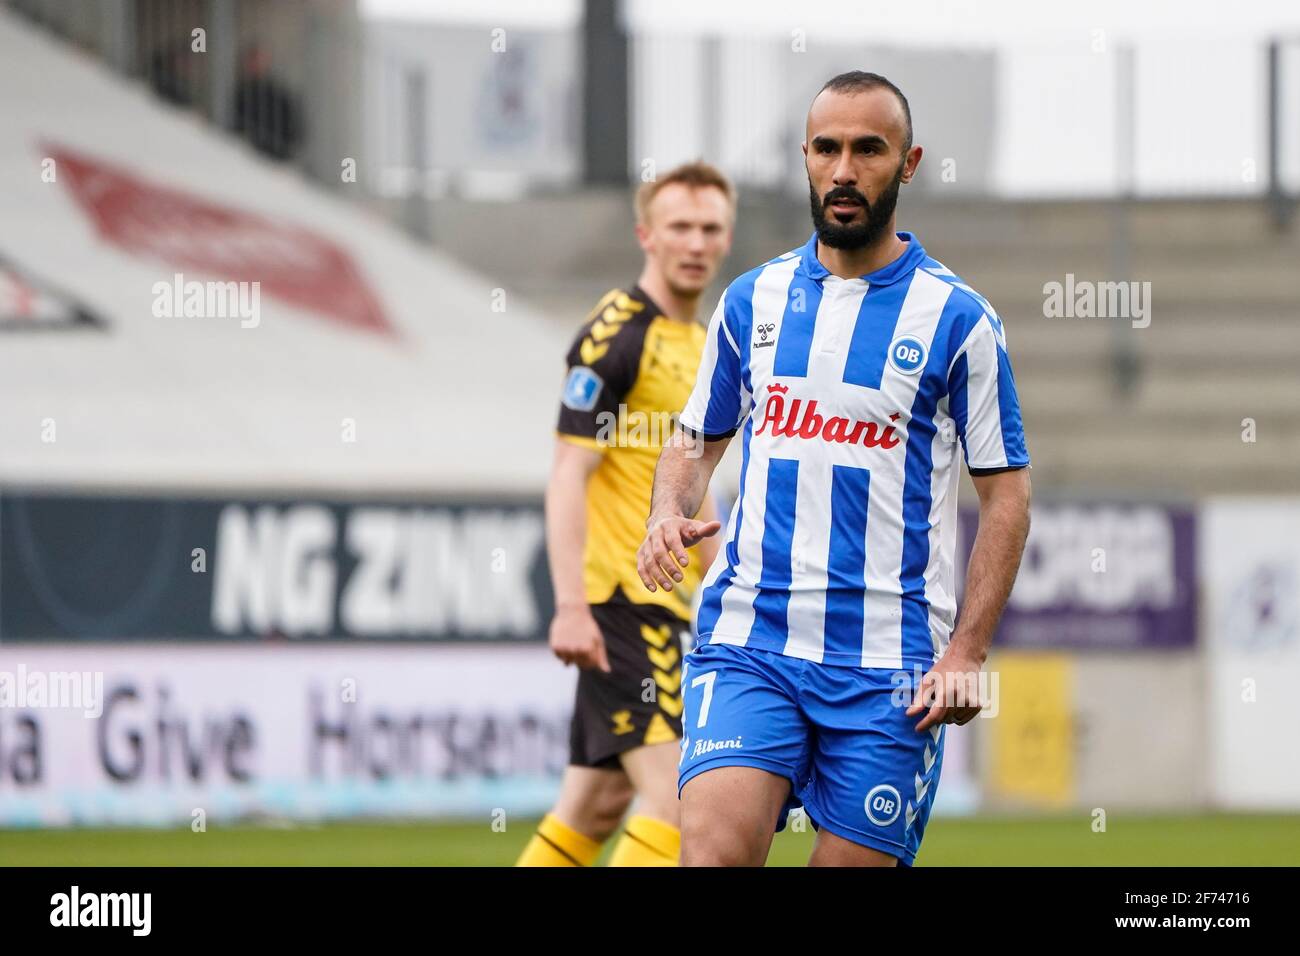 Horsens, Denmark. 04th Apr, 2021. Issam Jebali of OB during the 3F Superliga match between AC Horsens and Odense Boldklub at Casa Arena in Horsens. (Photo Credit: Gonzales Photo/Alamy Live